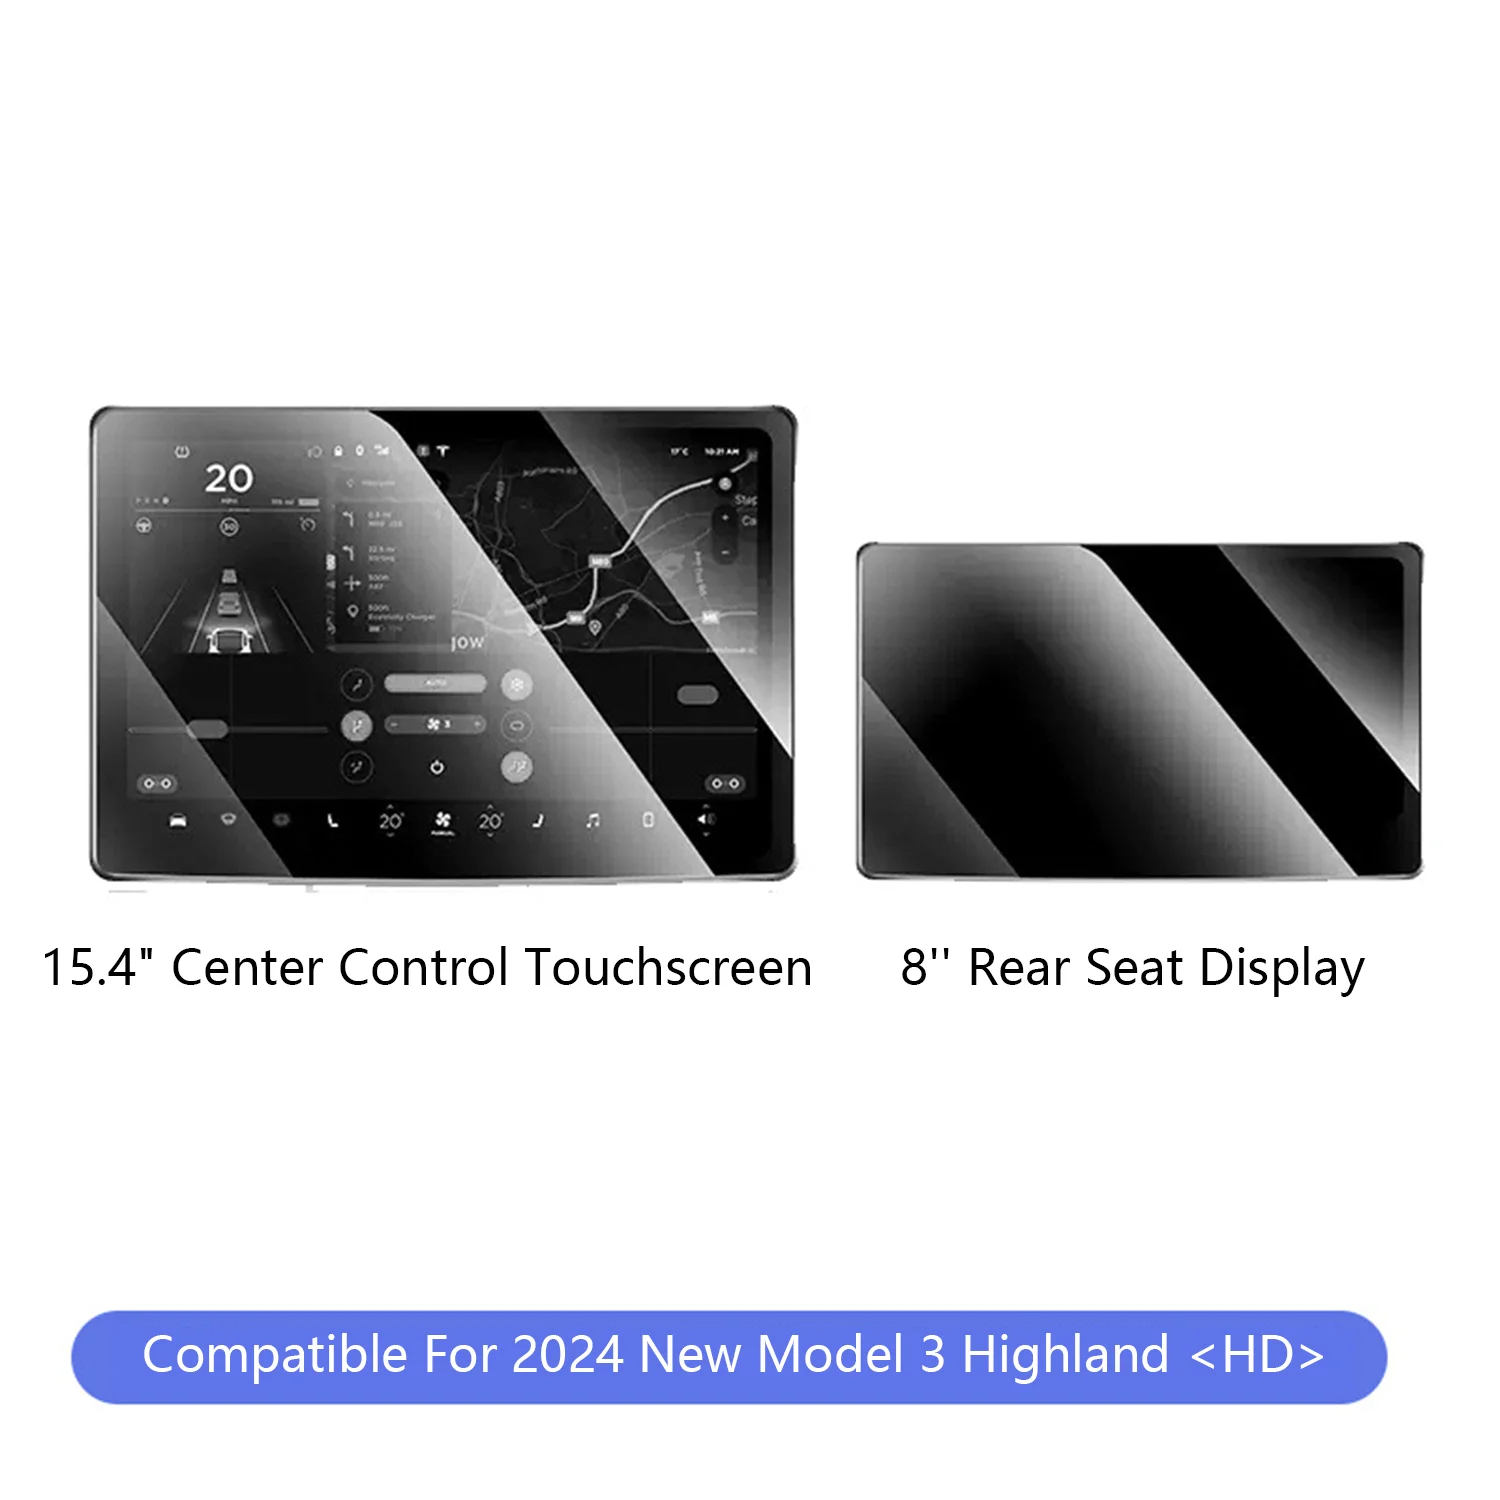 2Pcs For Tesla 2024 New Model 3 Highland Tempered Glass Screen Protector  15.4 Center Control Touchscreen 8'' Rear Seat Display - AliExpress